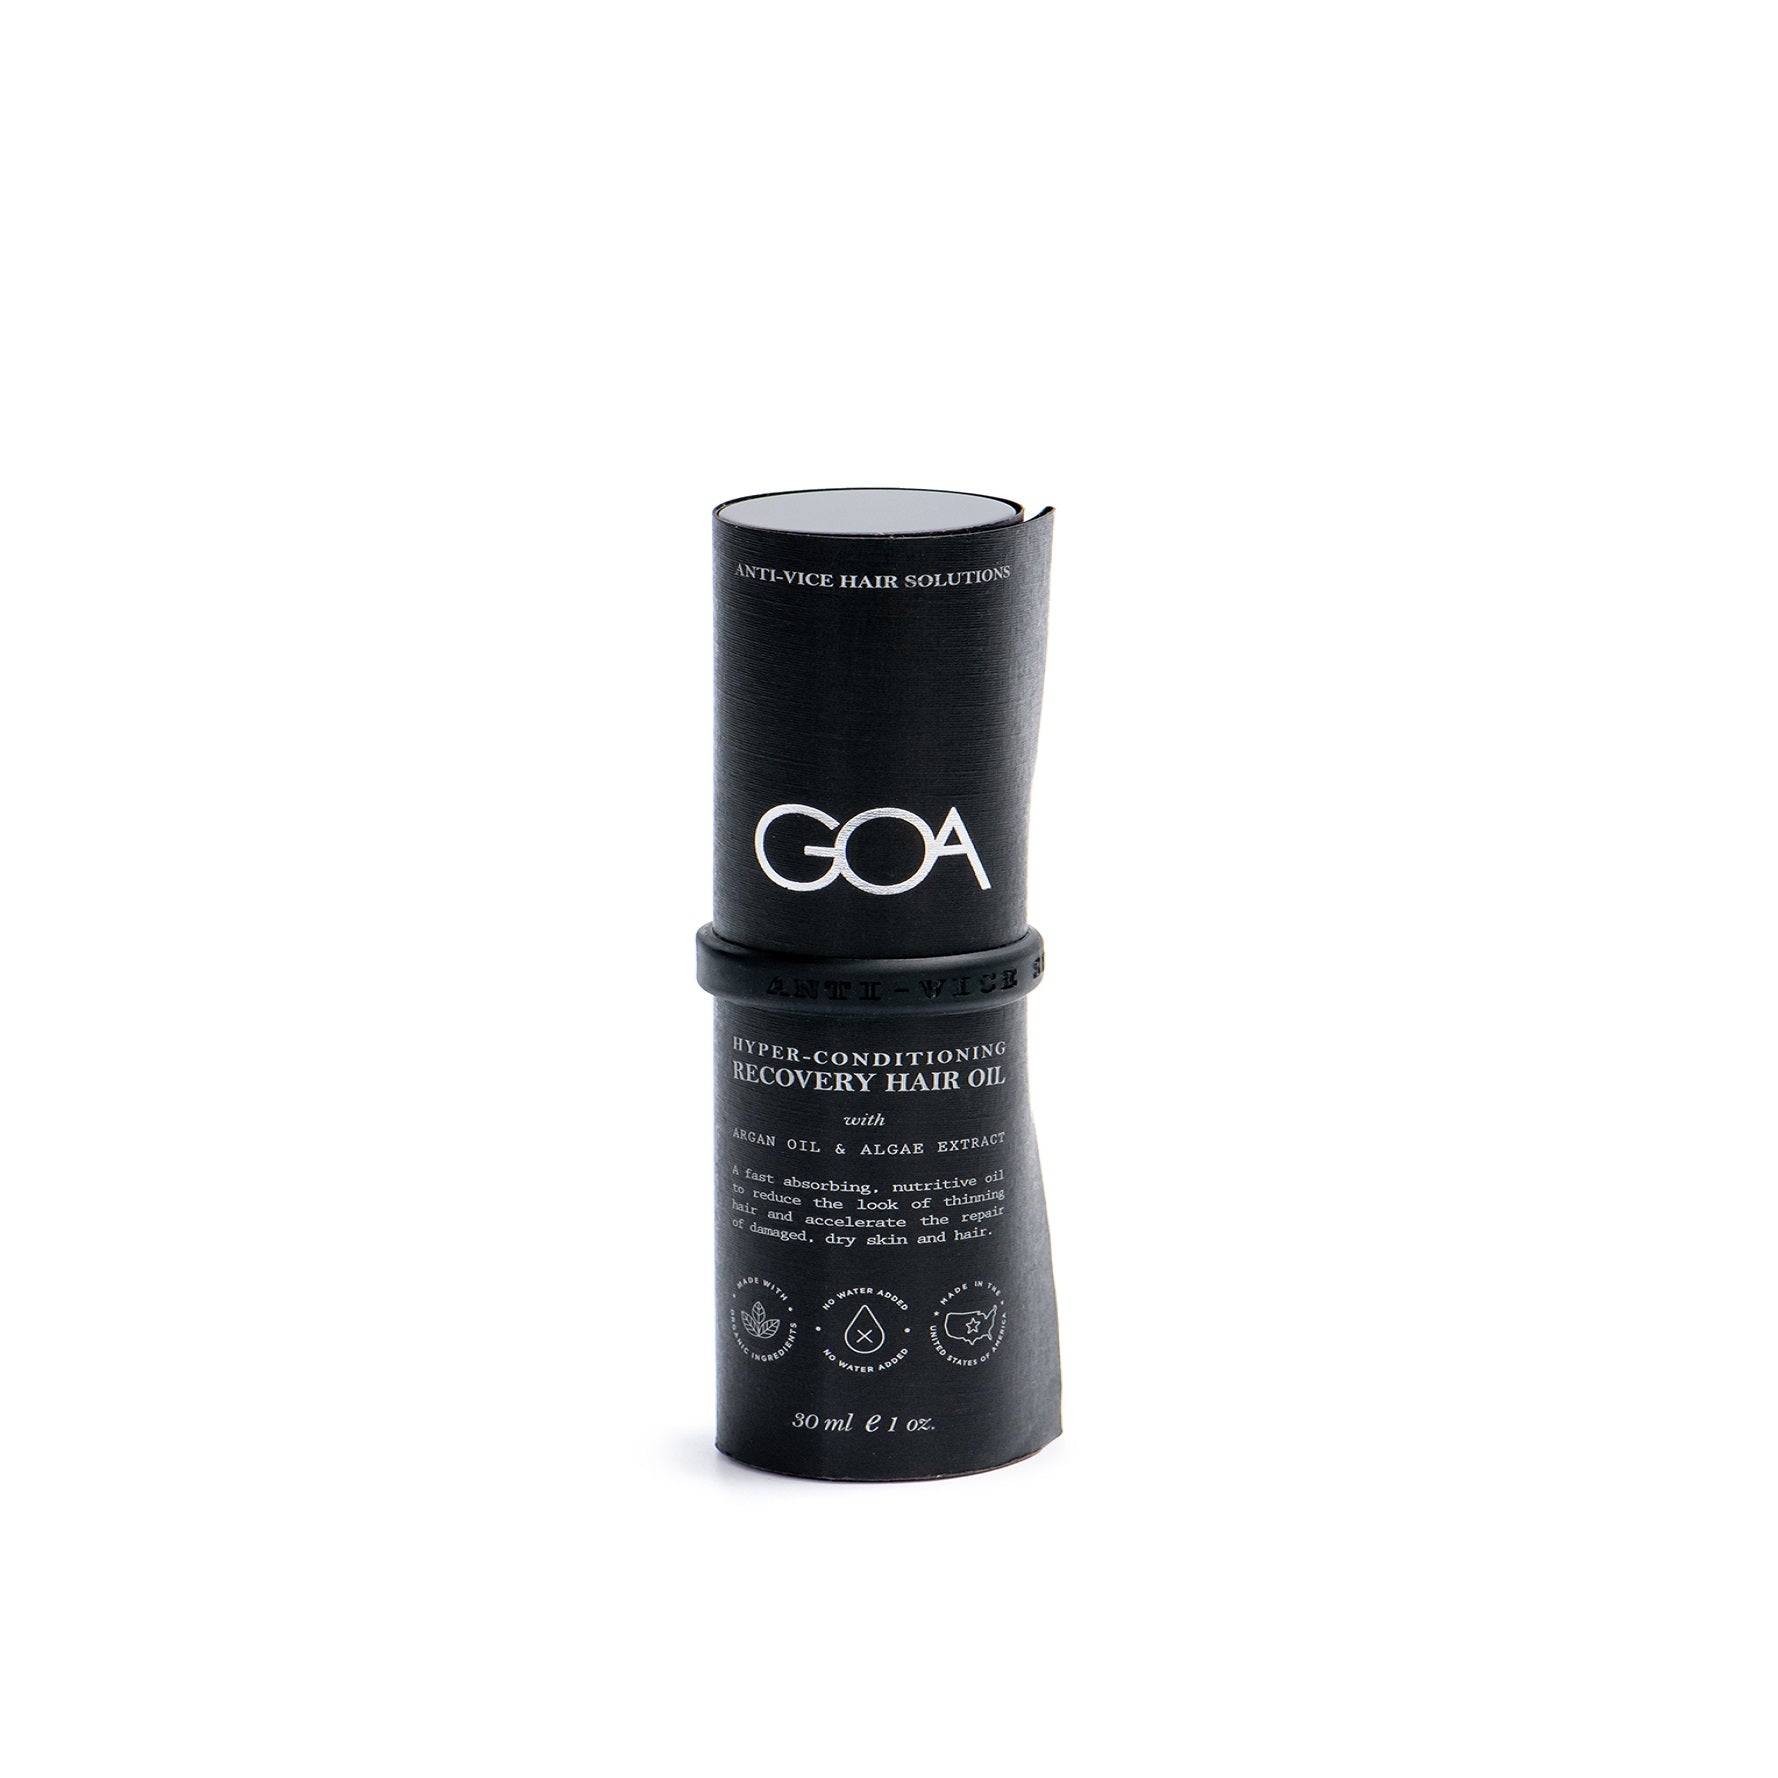 GOA - Hyper Conditioning Recovery Hair Oil